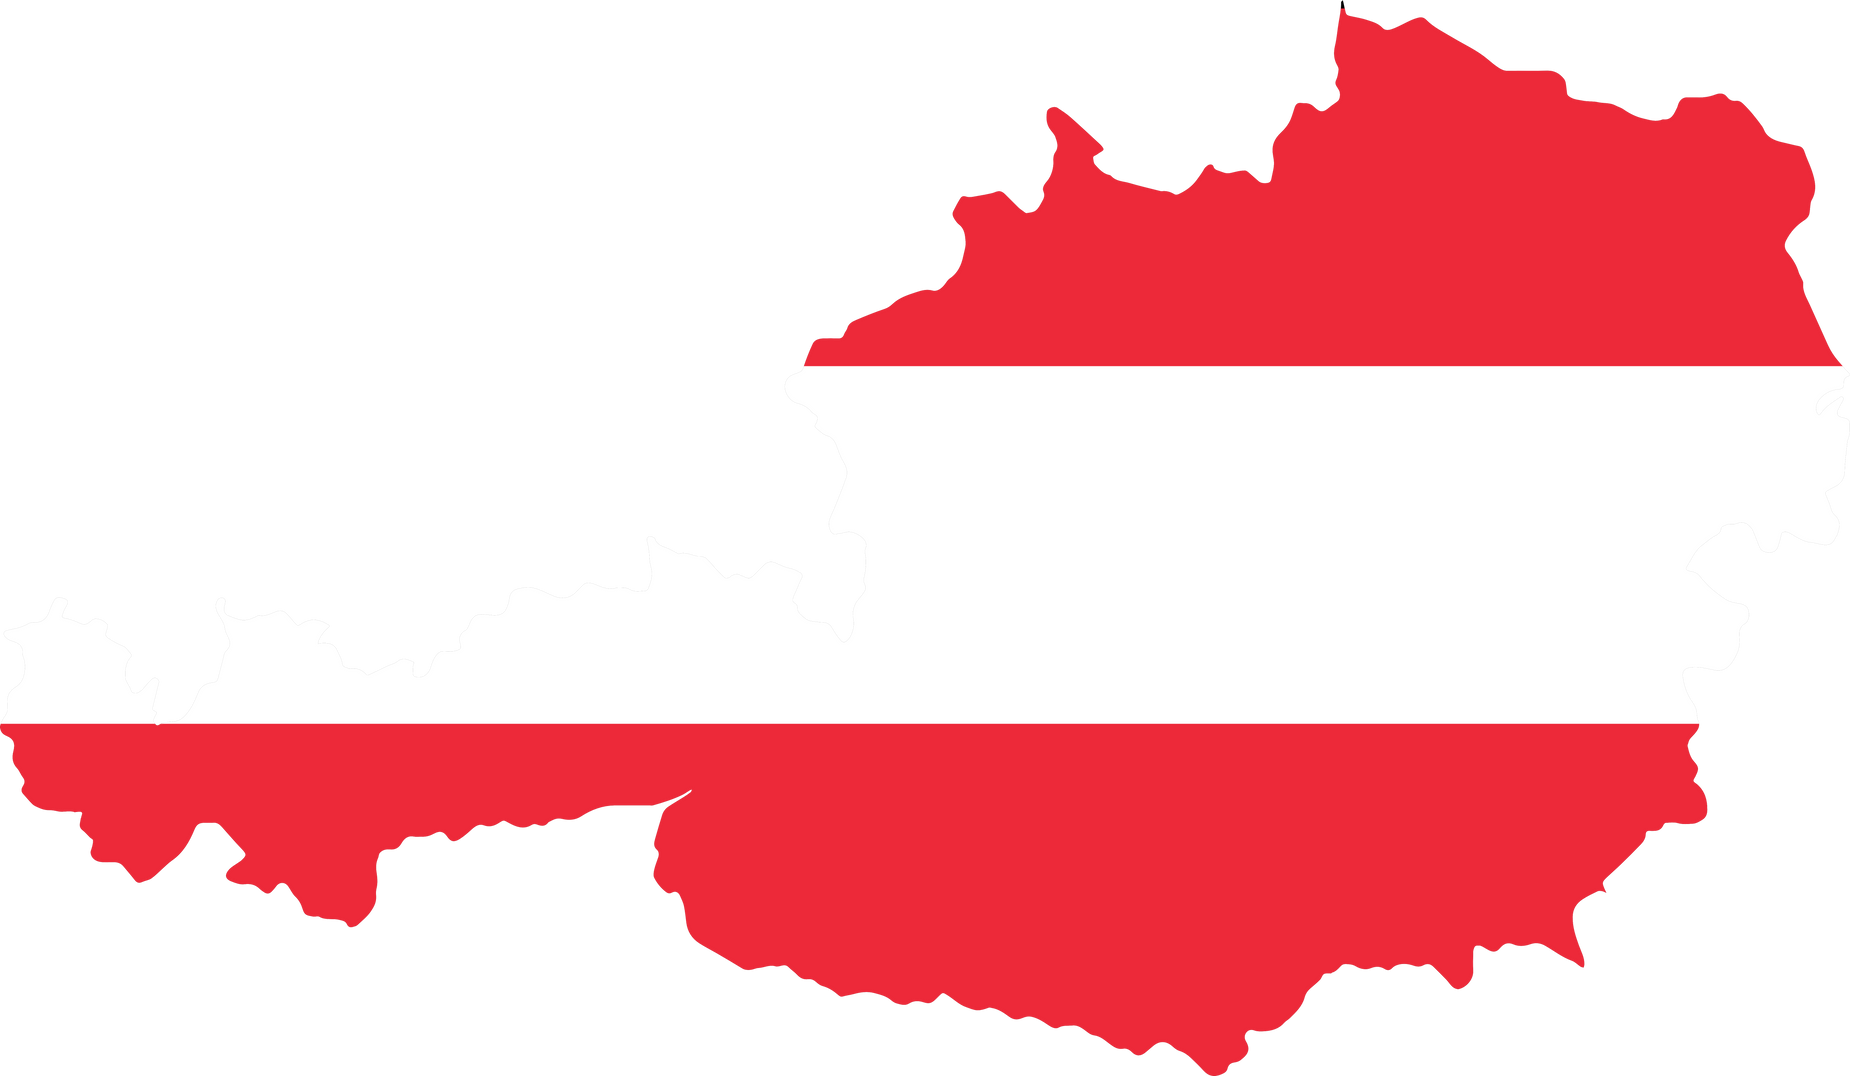 Austria  flag on map isolated  on png or transparent